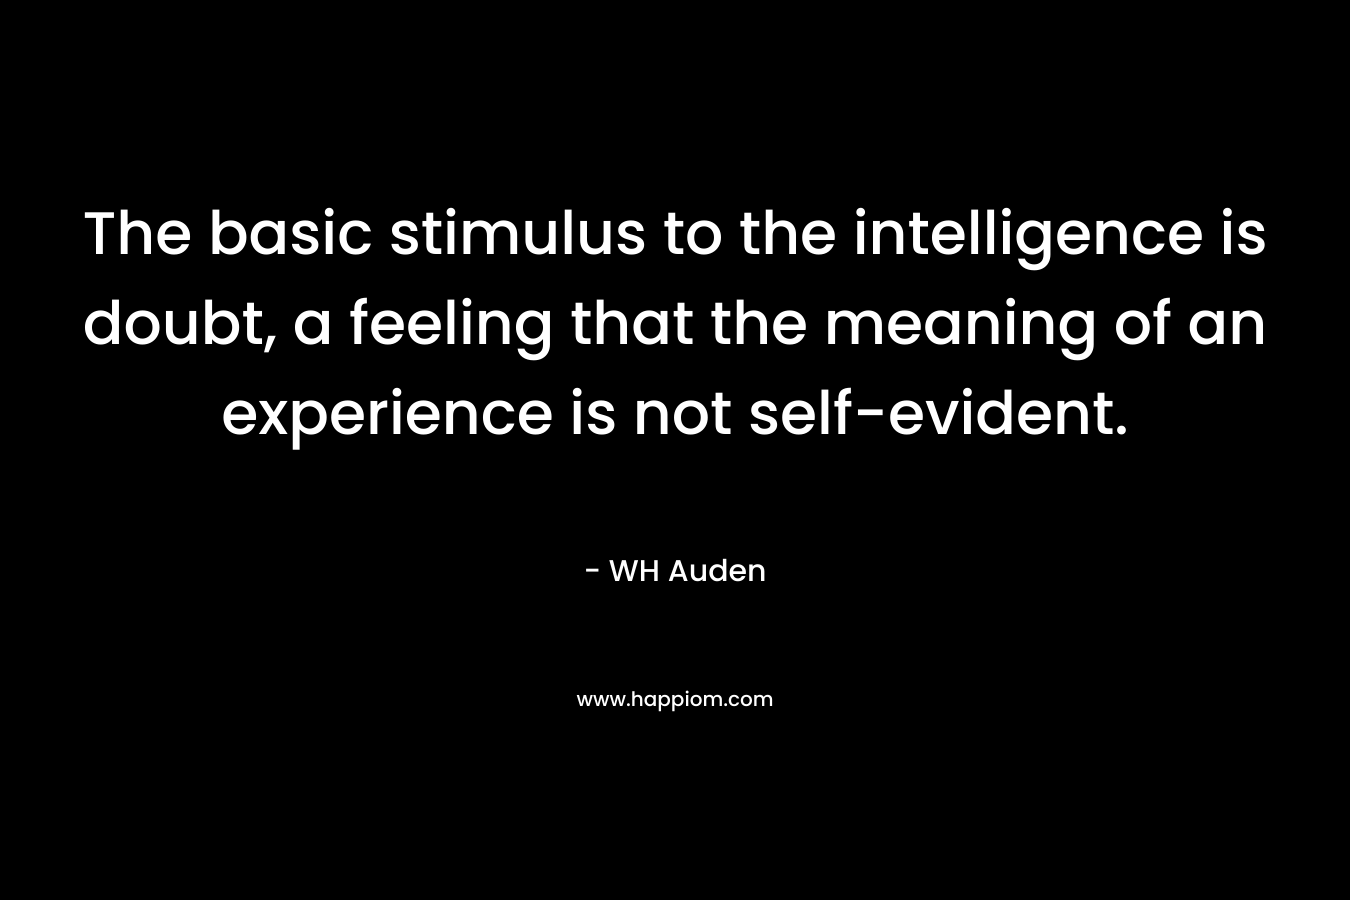 The basic stimulus to the intelligence is doubt, a feeling that the meaning of an experience is not self-evident. – WH Auden